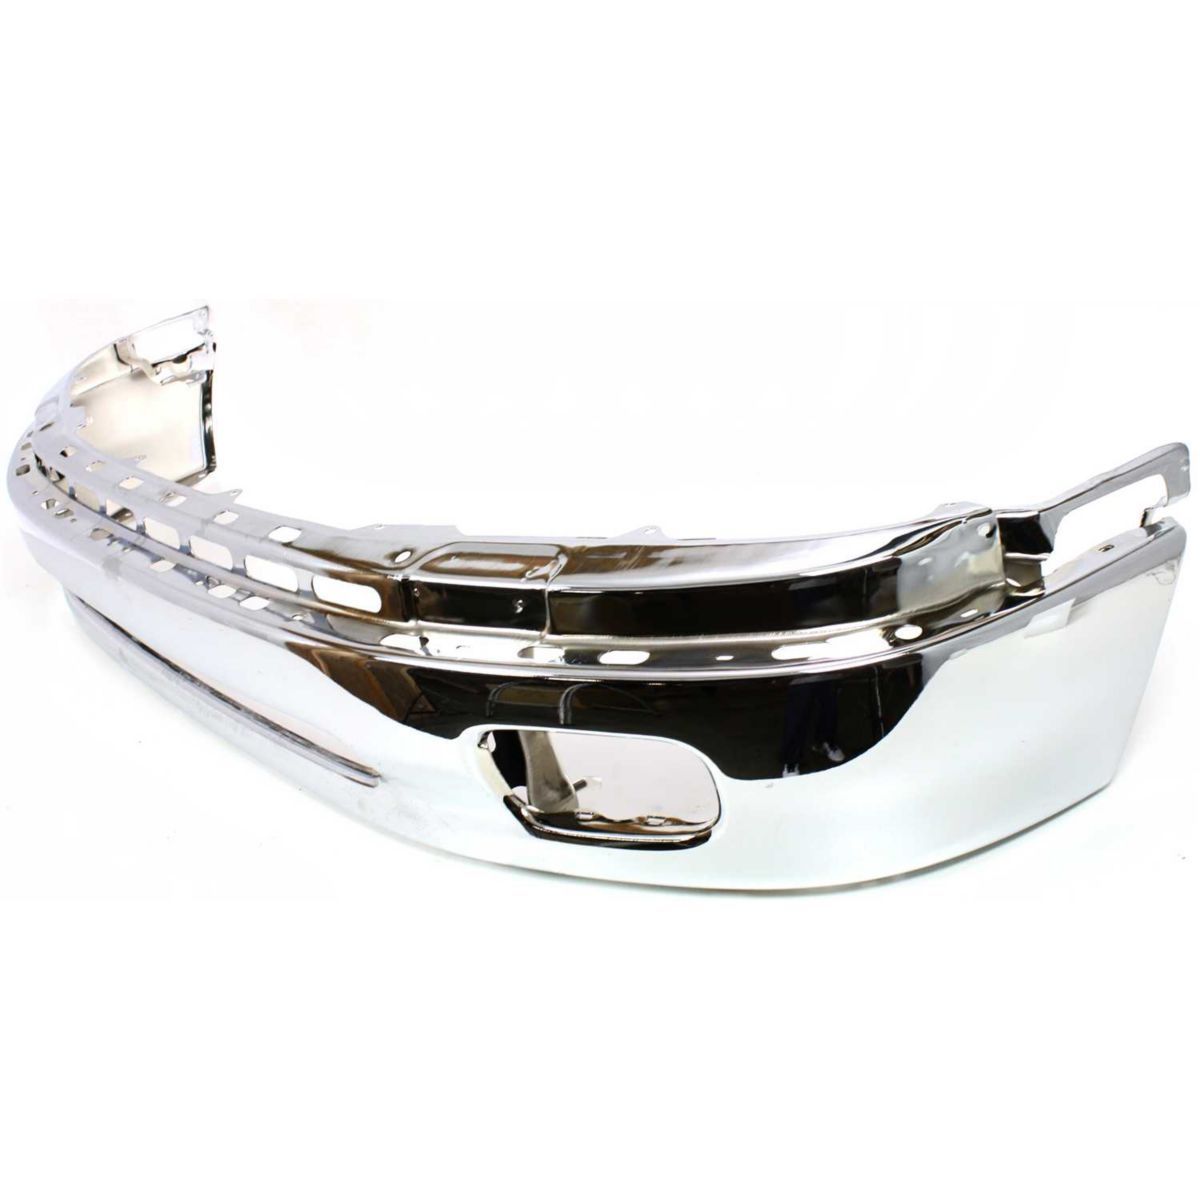 Toyota Tundra 2000 - 2006 Front Chrome Bumper 00 - 06 TO1002170 Bumper-King